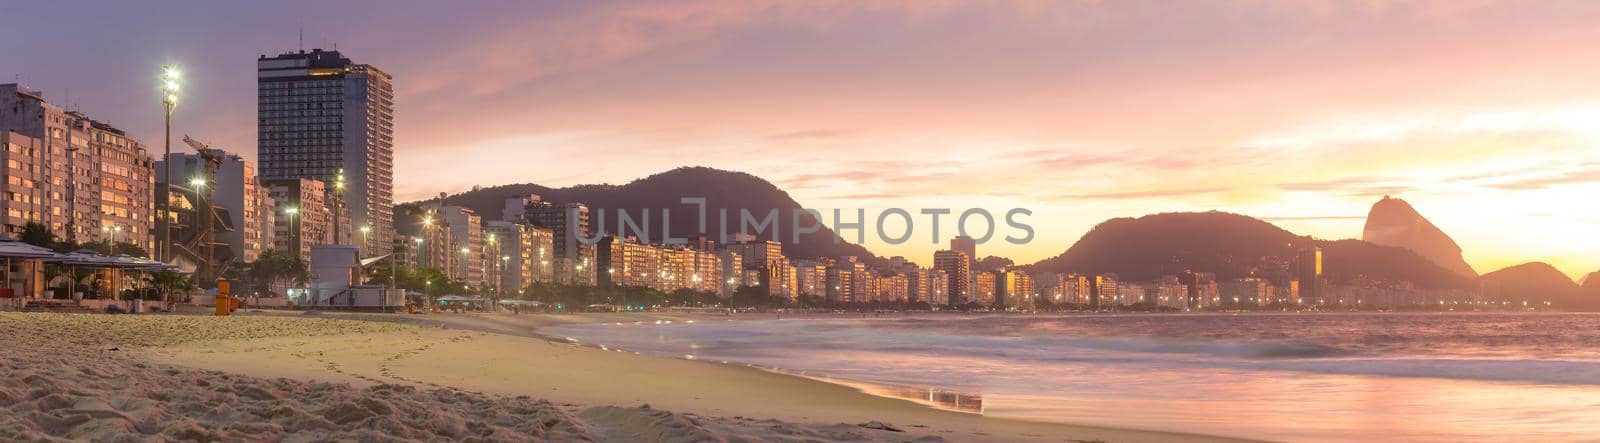 Sunrise view of Copacabana and mountain Sugar Loaf in Rio de Janeiro by f11photo